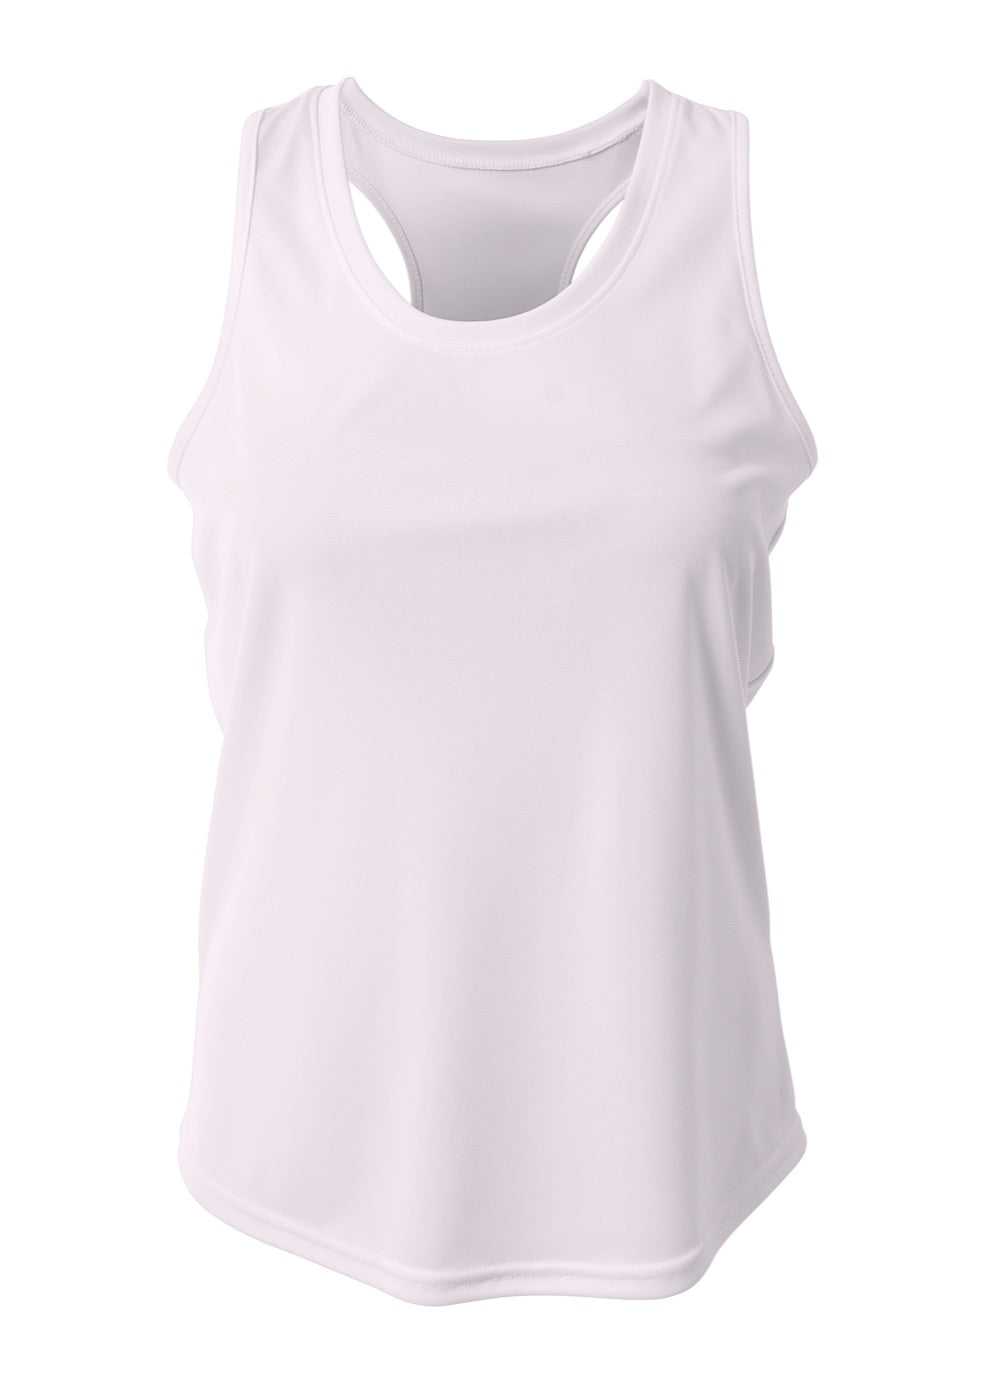 A4 NW1179 Athletic Racerback Woman's Tank - White - HIT a Double